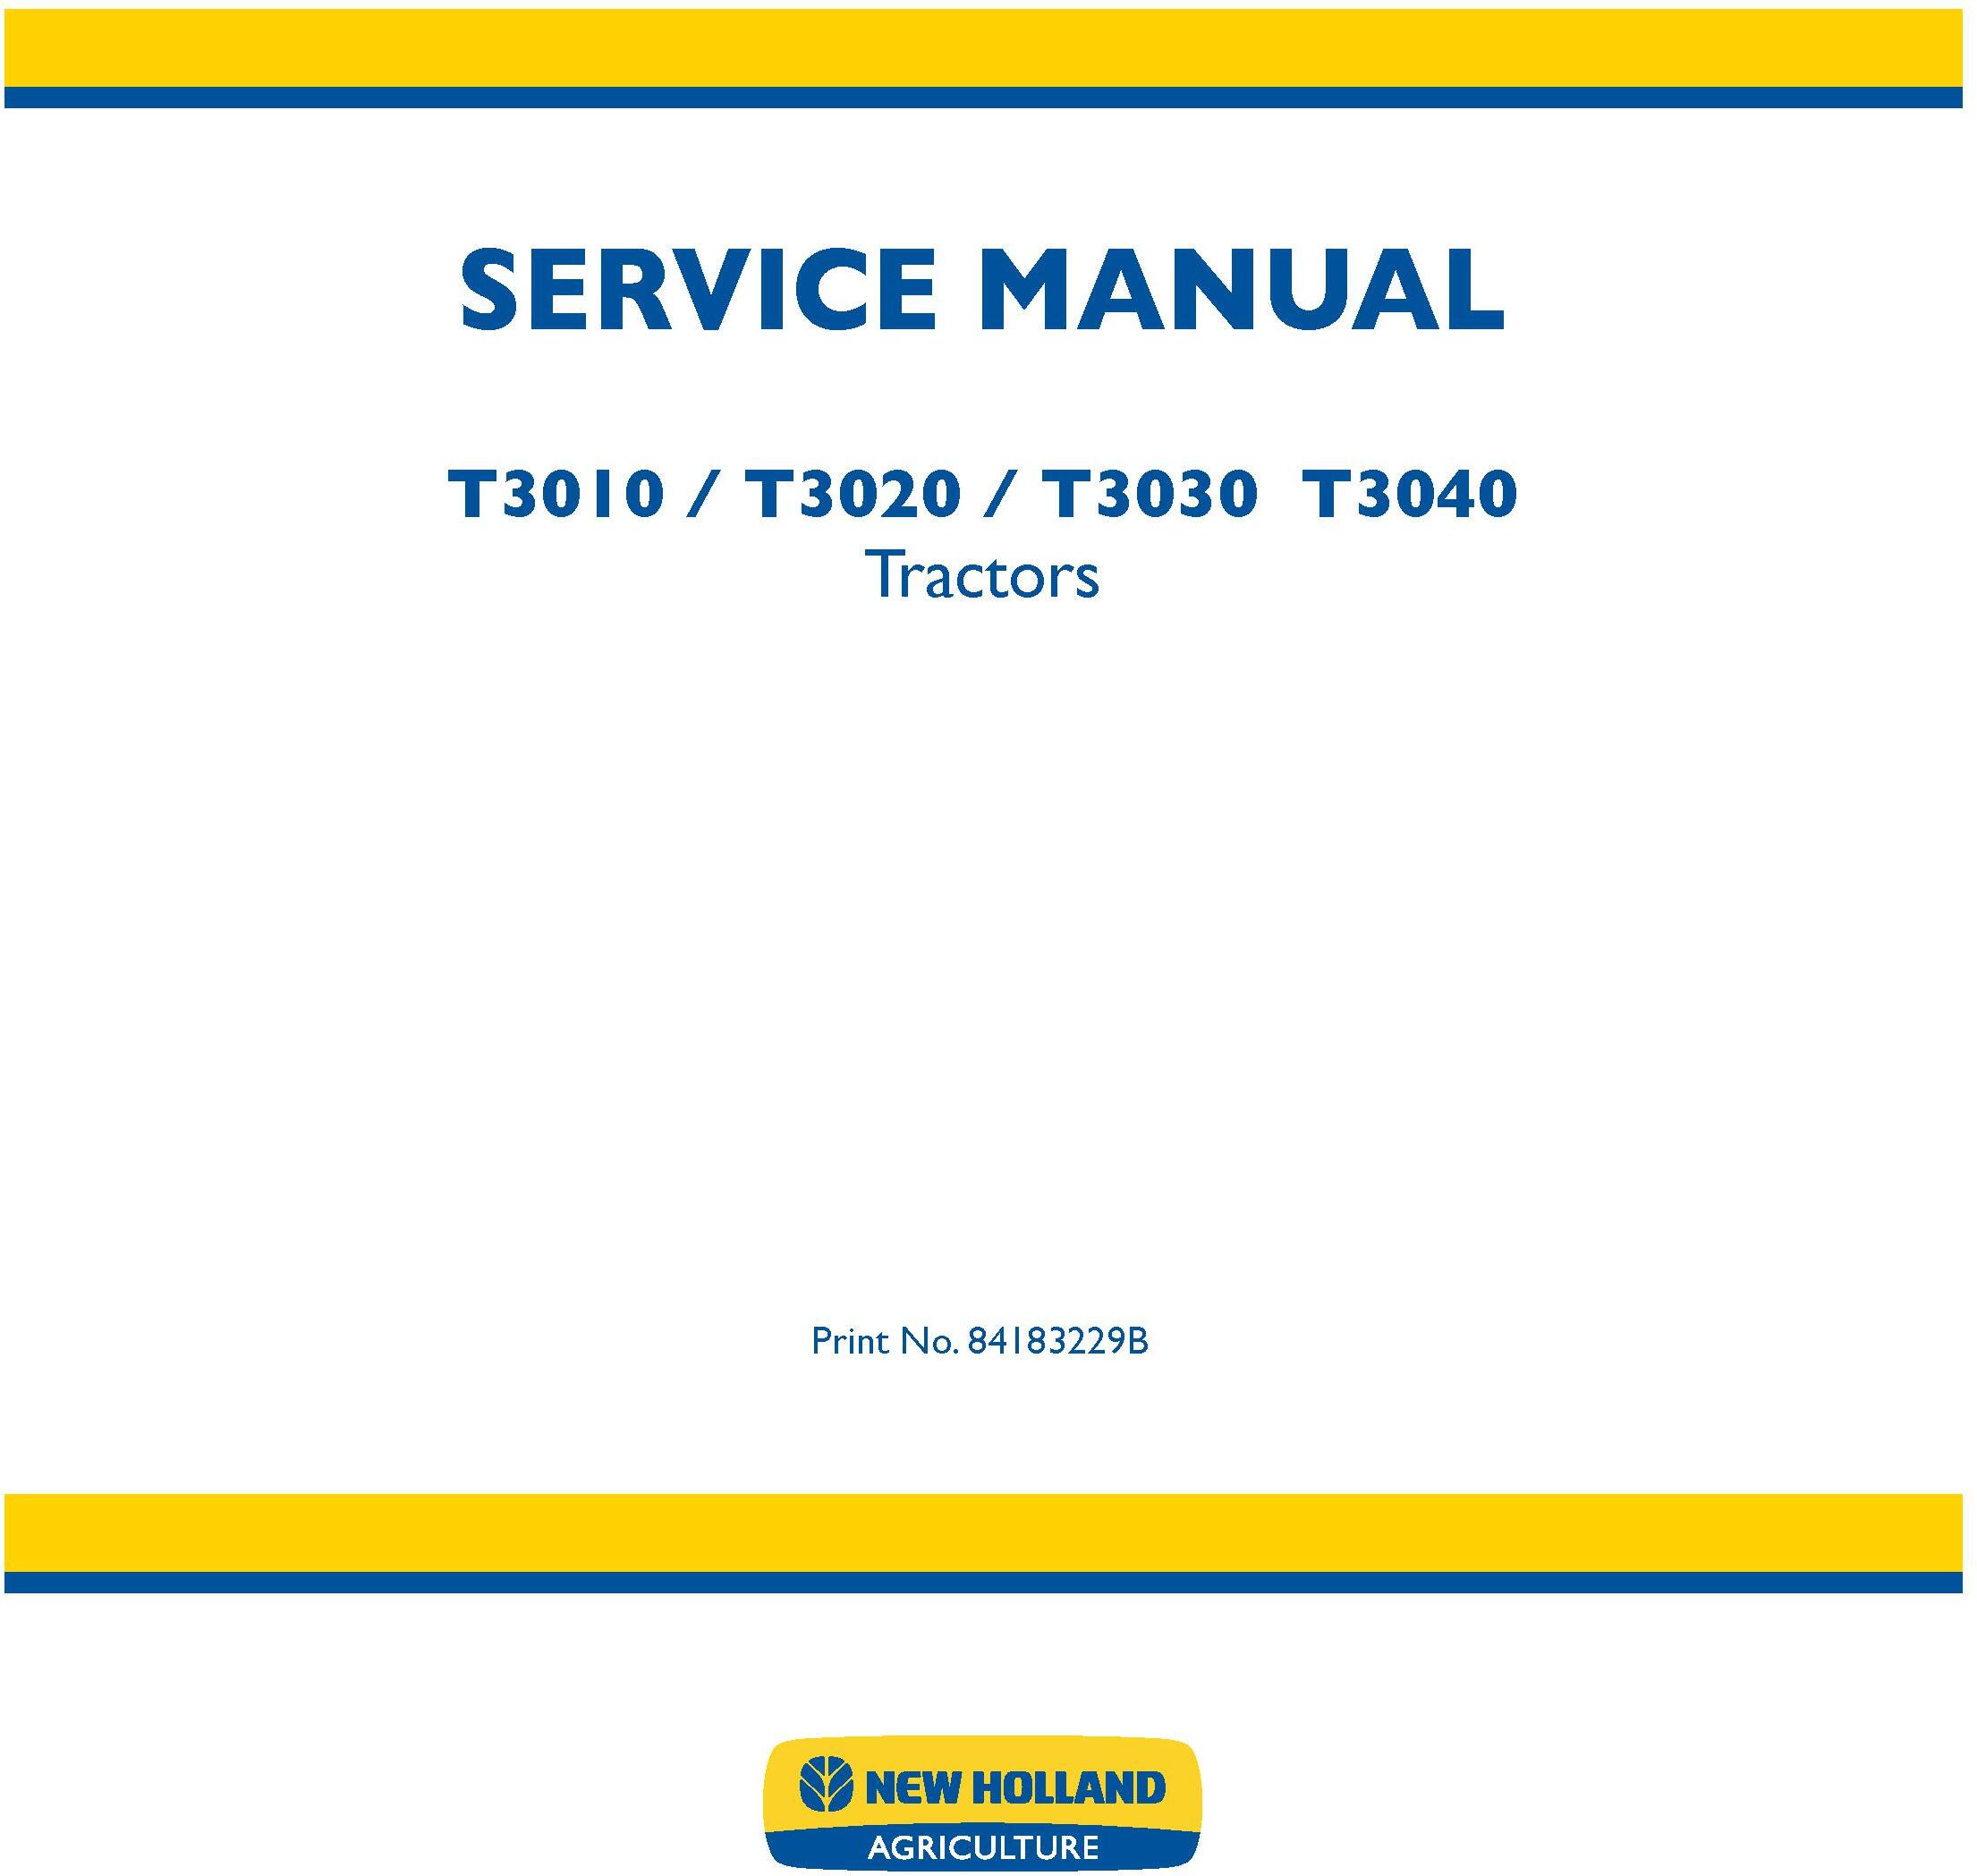 New Holland T3010, T3020, T3030, T3040 Agricultural Tractors Service Manual